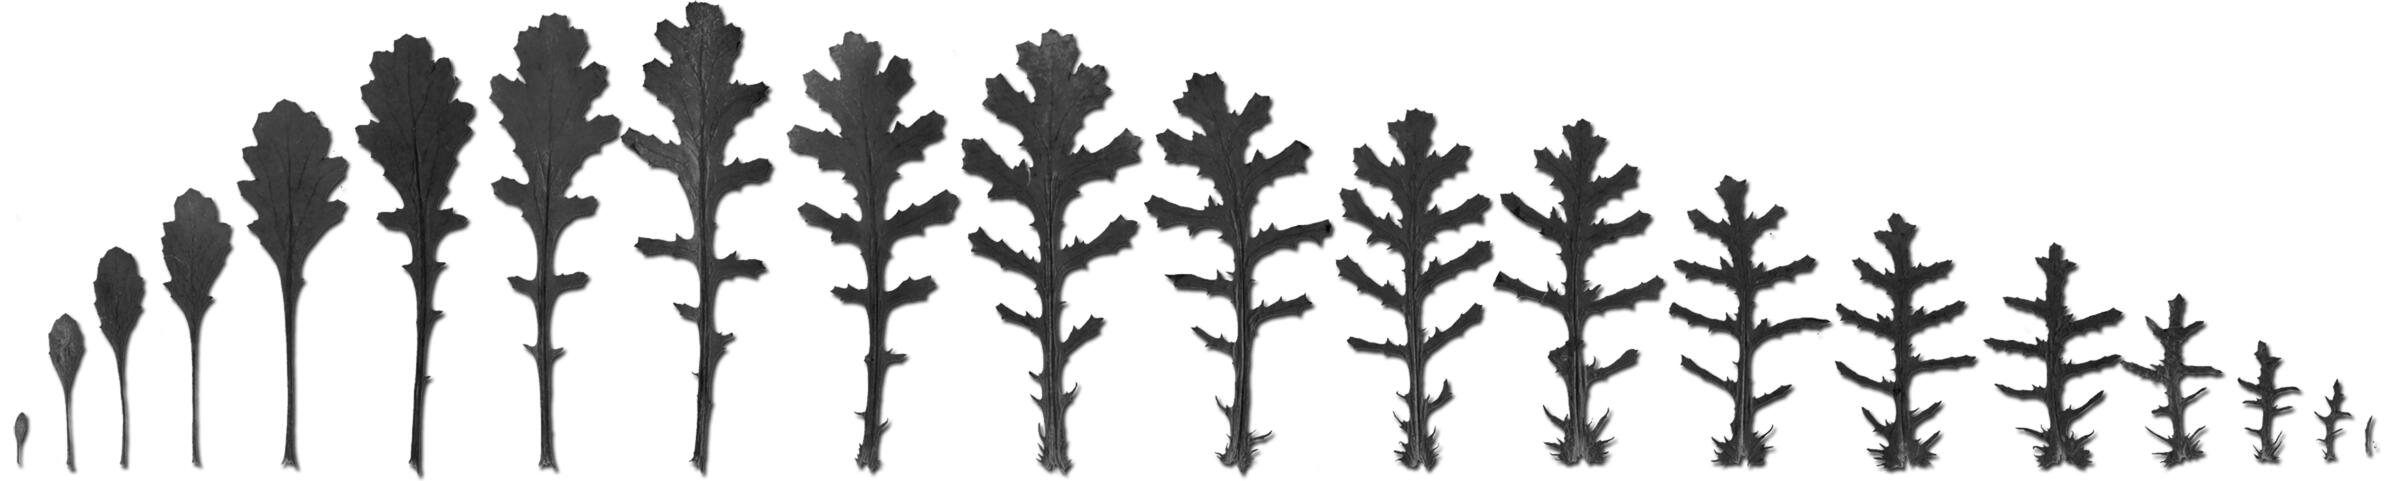 groundsel leaf sequence